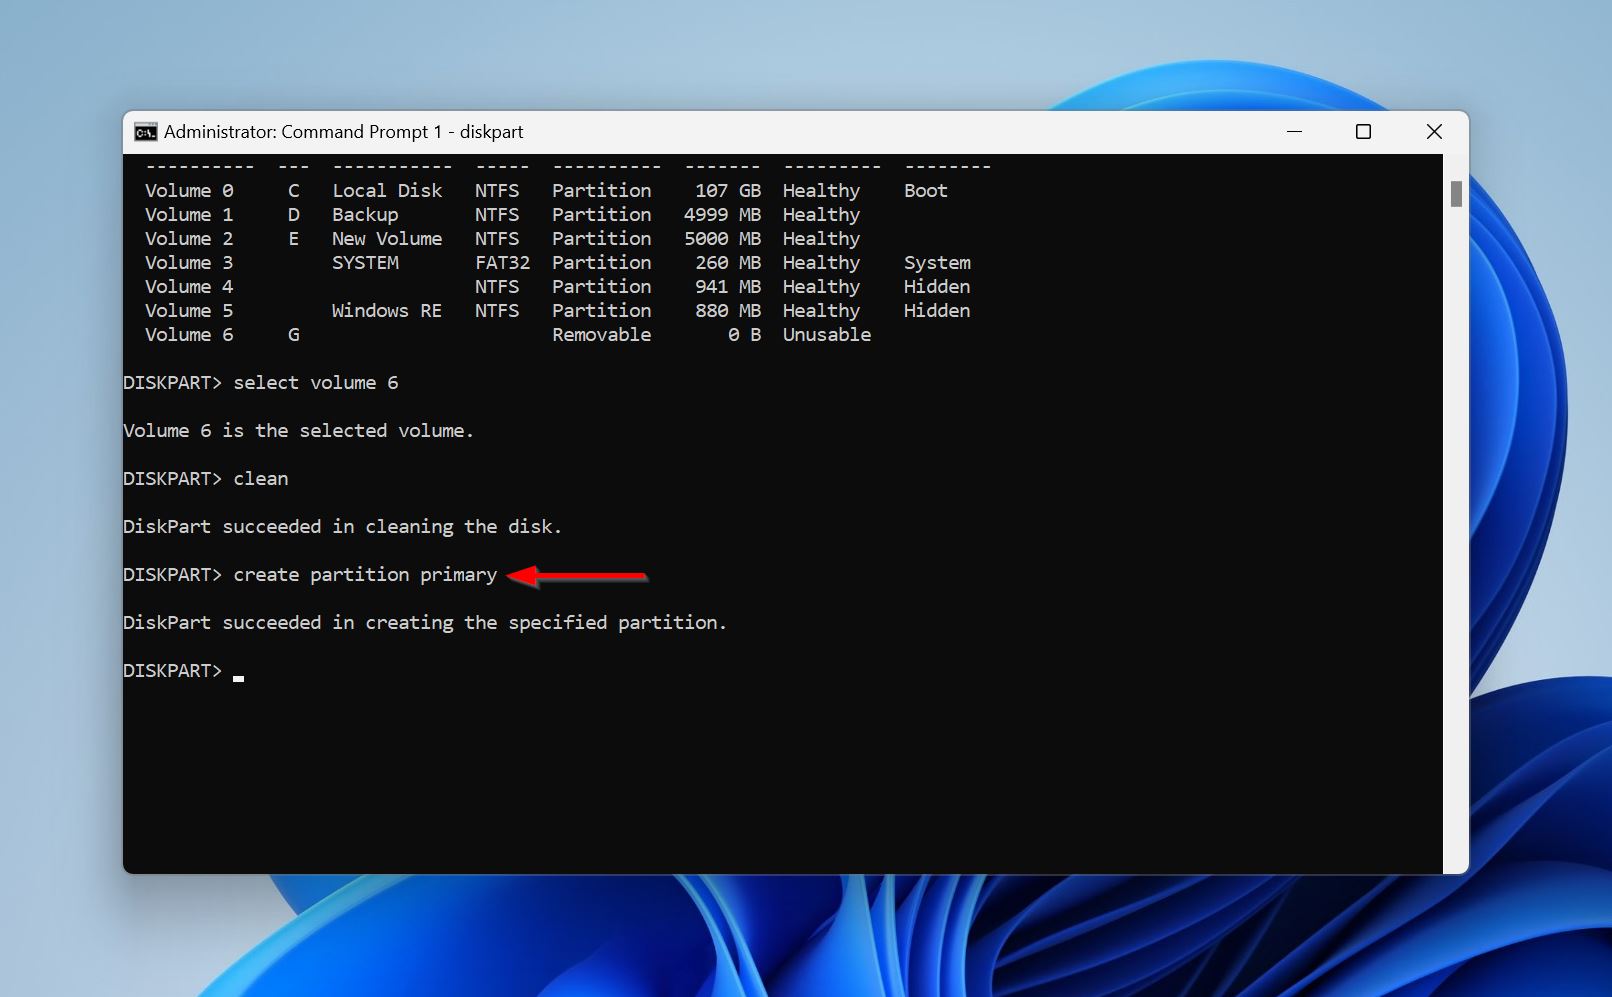 Create partition primary command.